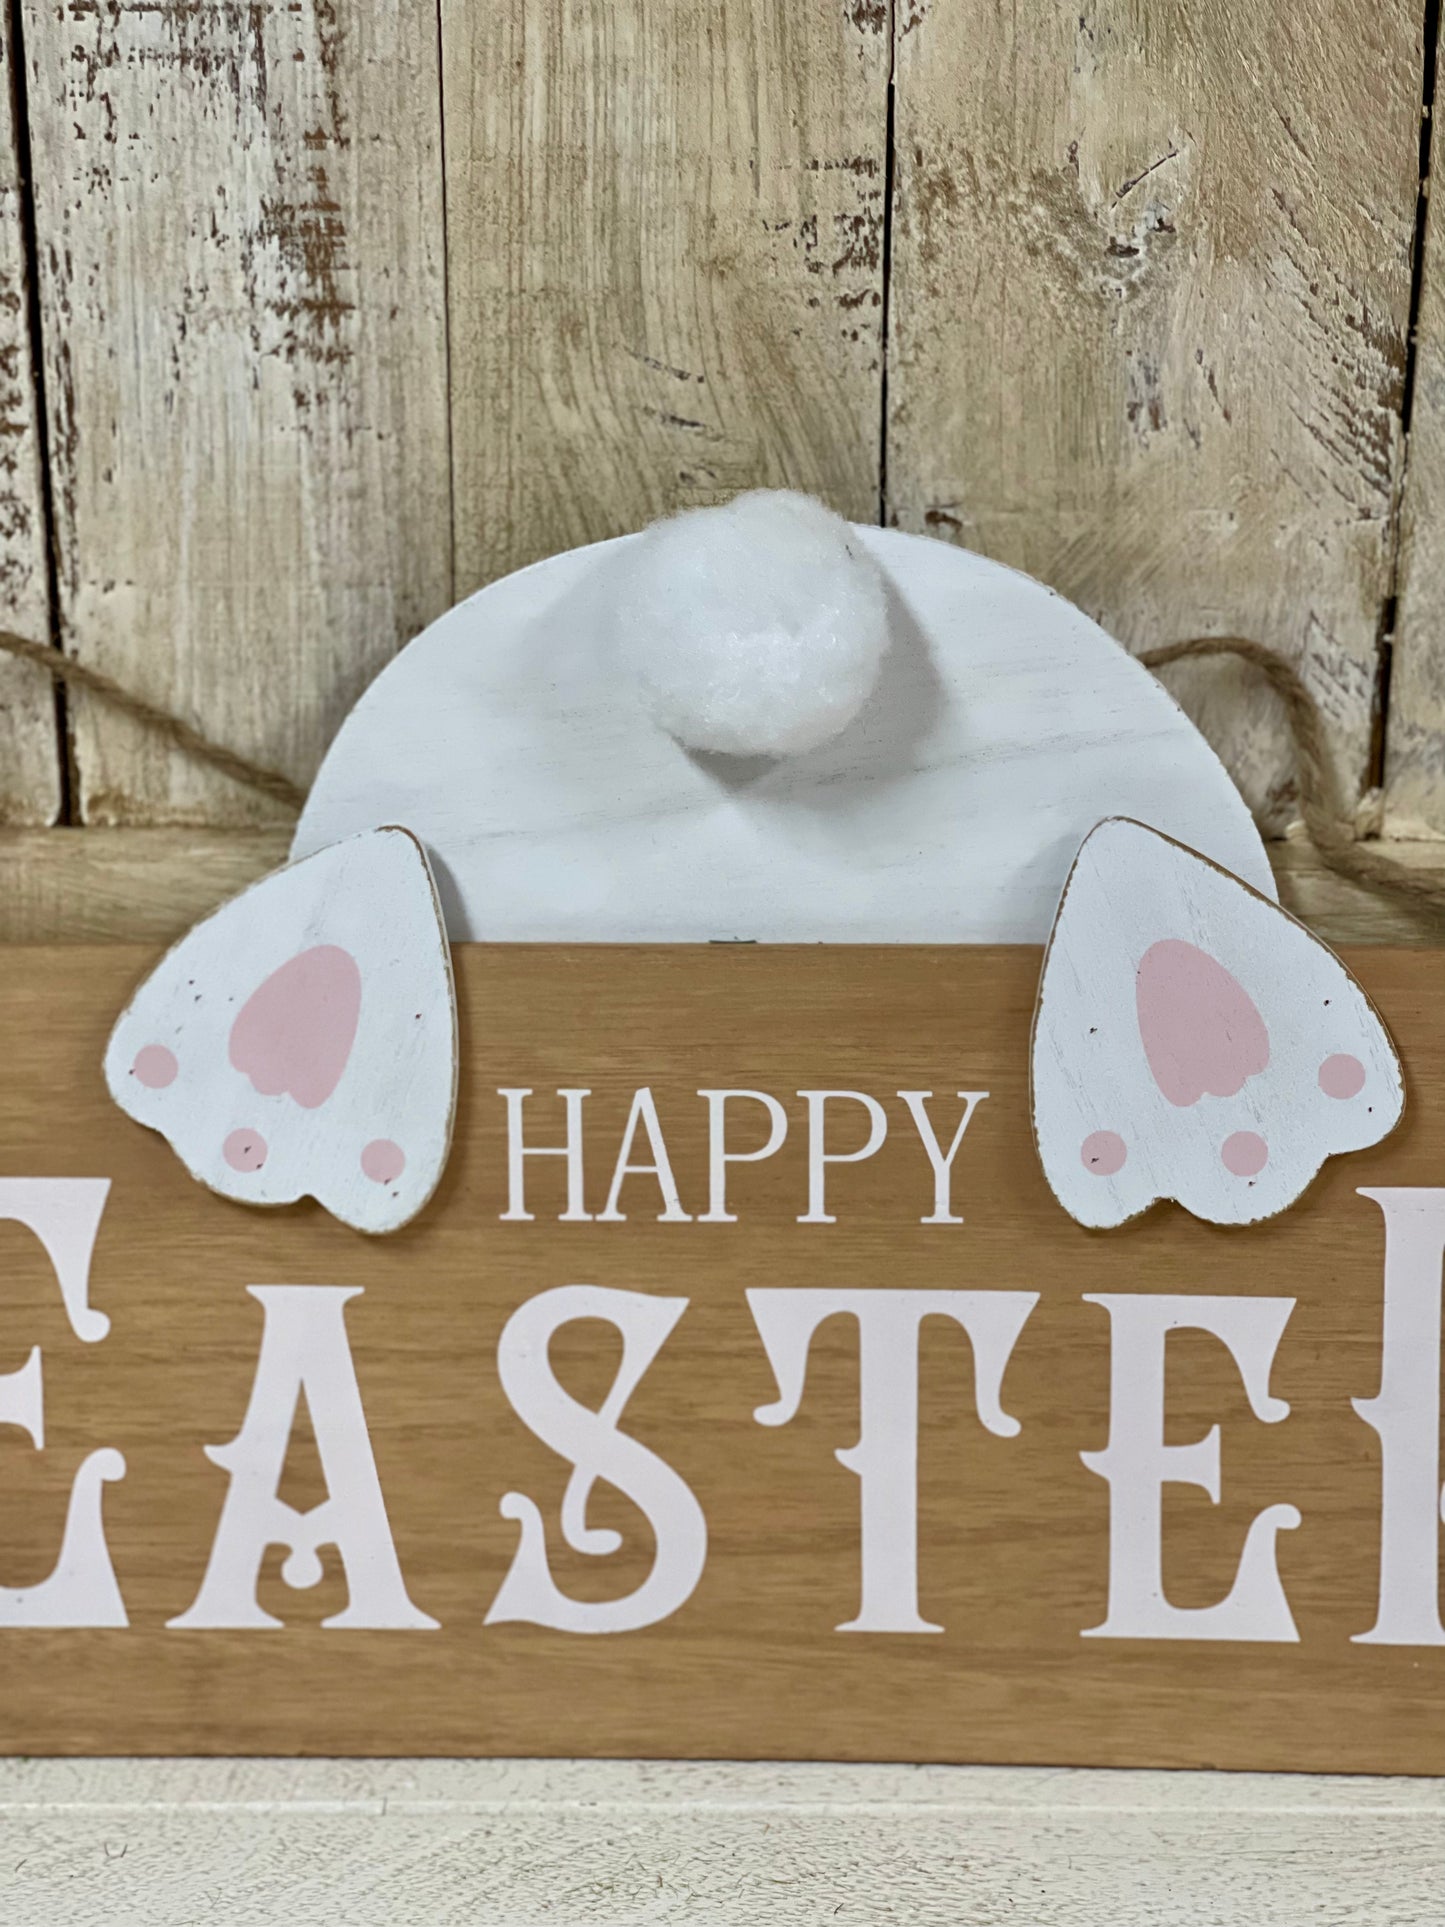 10 Inch Happy Easter Hanging Wood Plaque